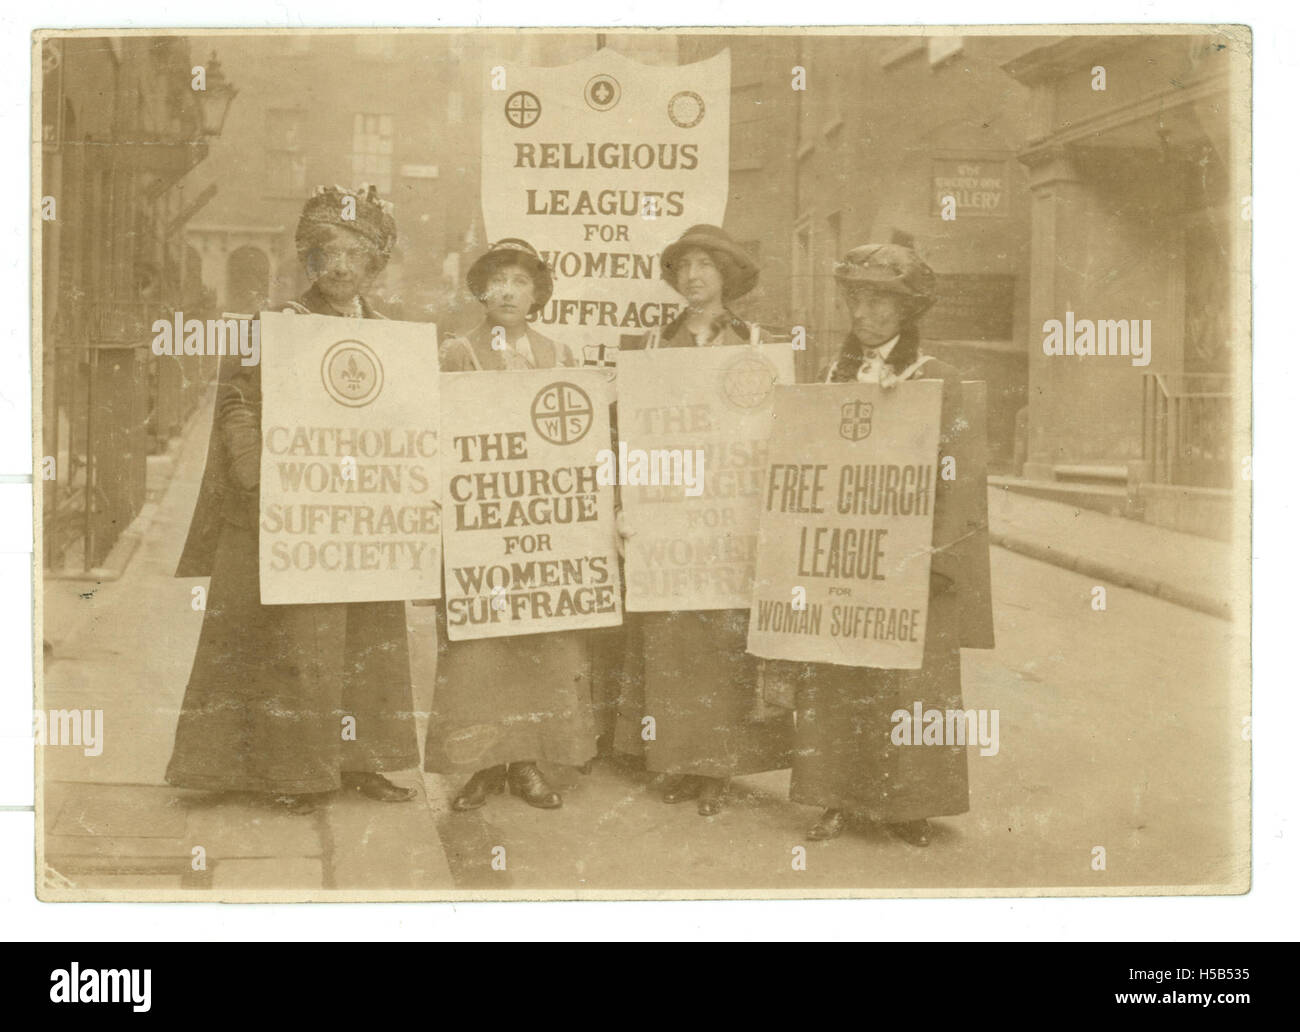 Religious Leagues for Women's Suffrage c.1914 Stock Photo